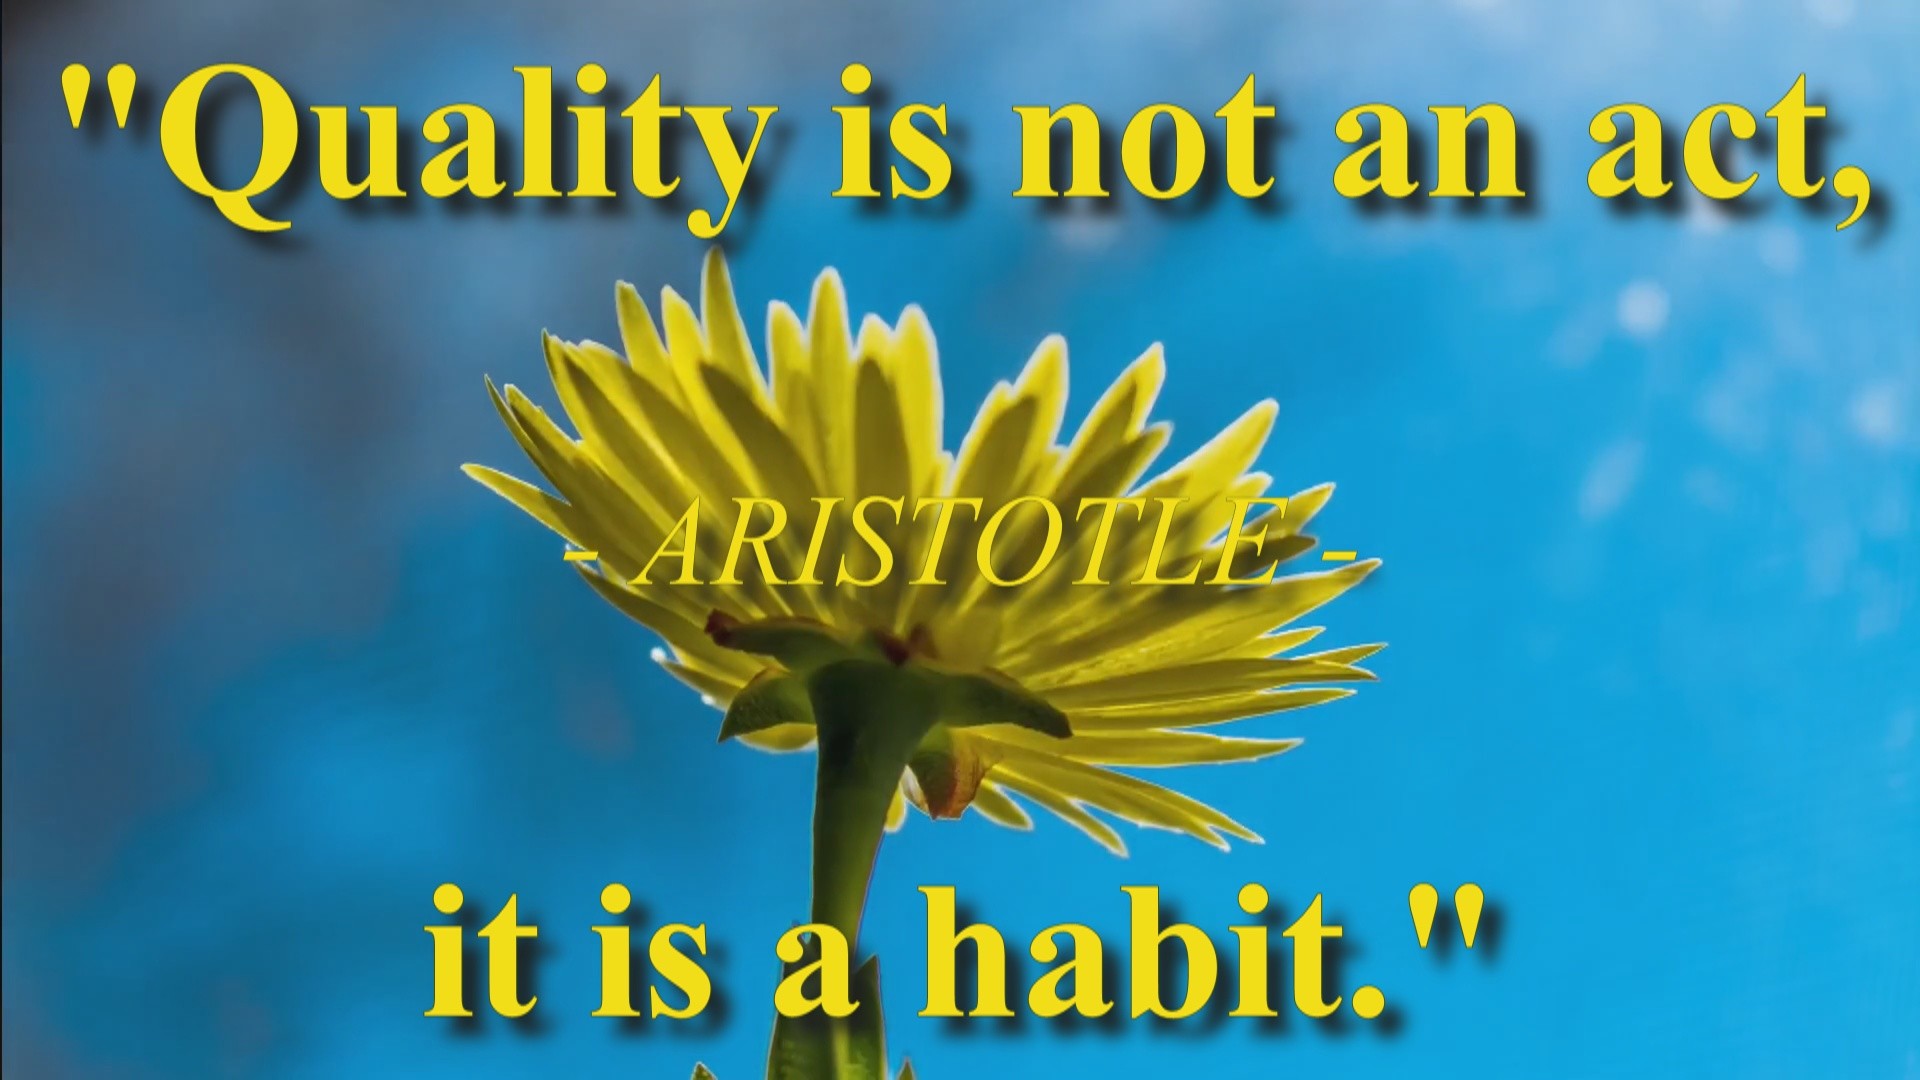 Quality is not an act - Aristotle